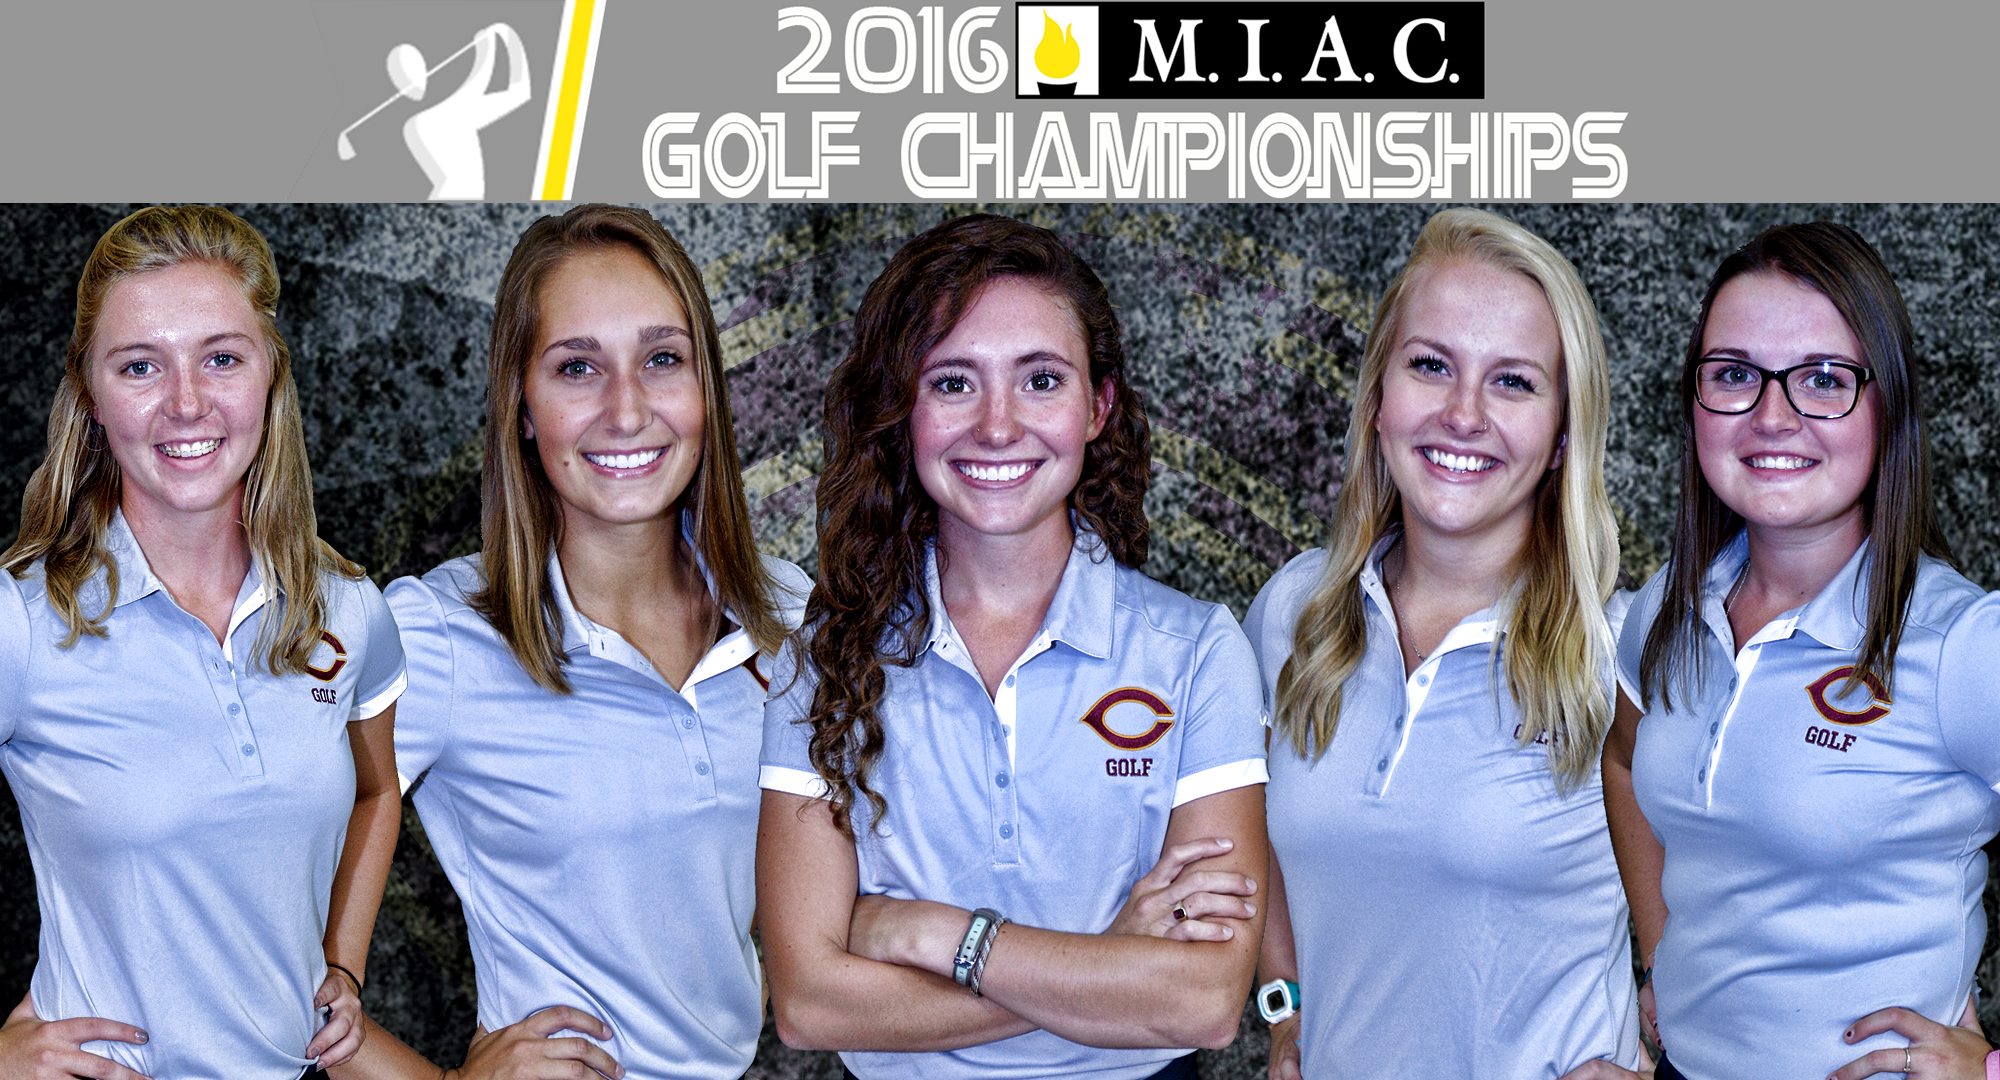 The Concordia lineup for the 2016 MIAC Championship Meet includes (L-R): Katie Froemke, Erin Pennington, Emily Grace Olson, Emily Ladd and Katie Krueger